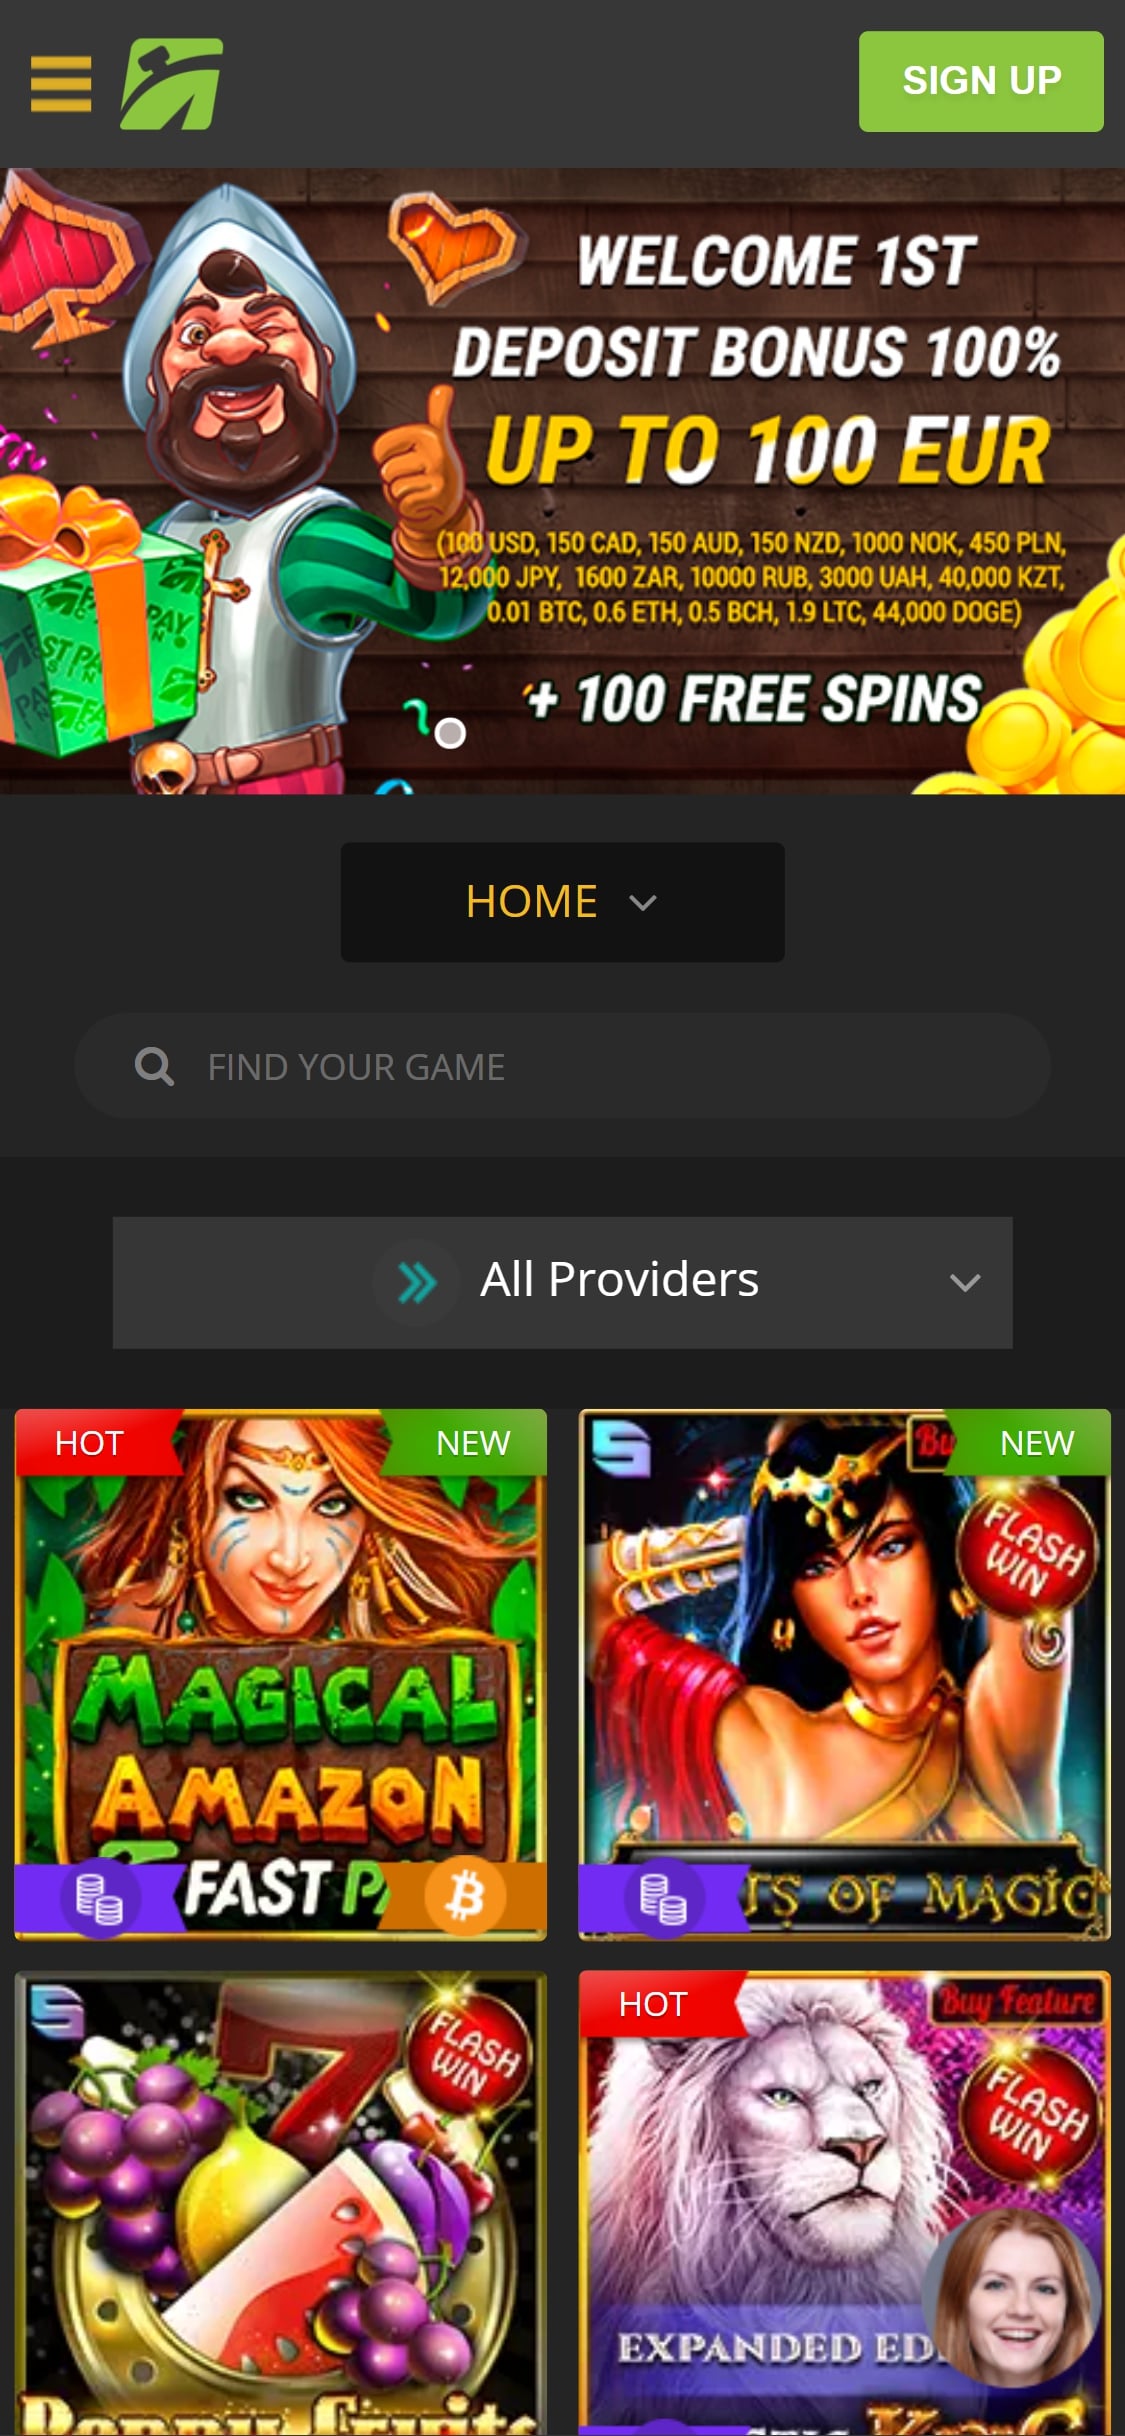 Fastpay Casino Mobile Review